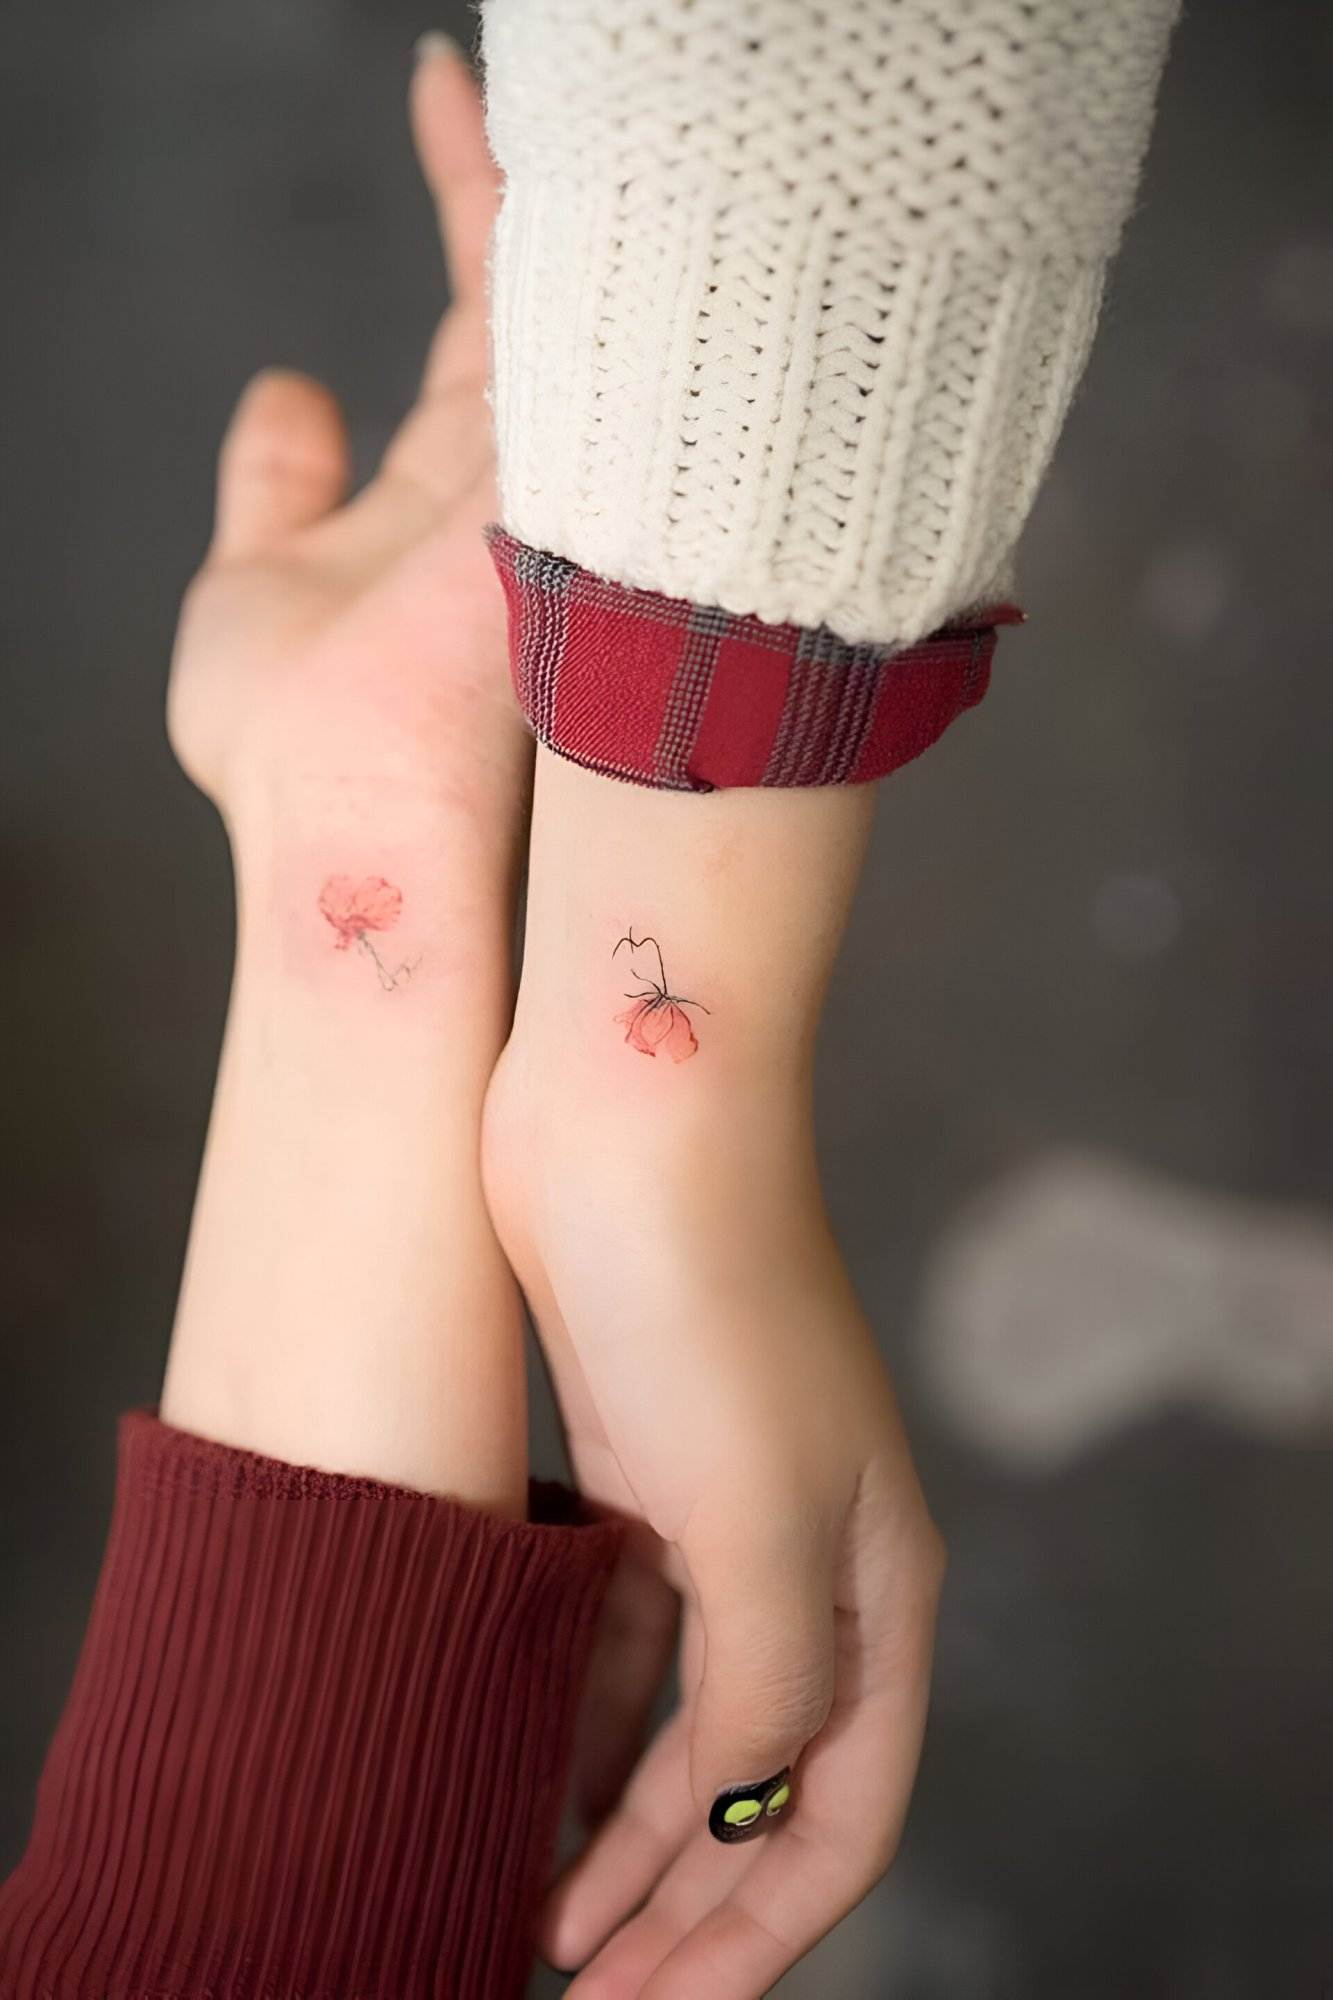 27 Feminine Best Friend Tattoos With The Perfect Elegant Touch 12